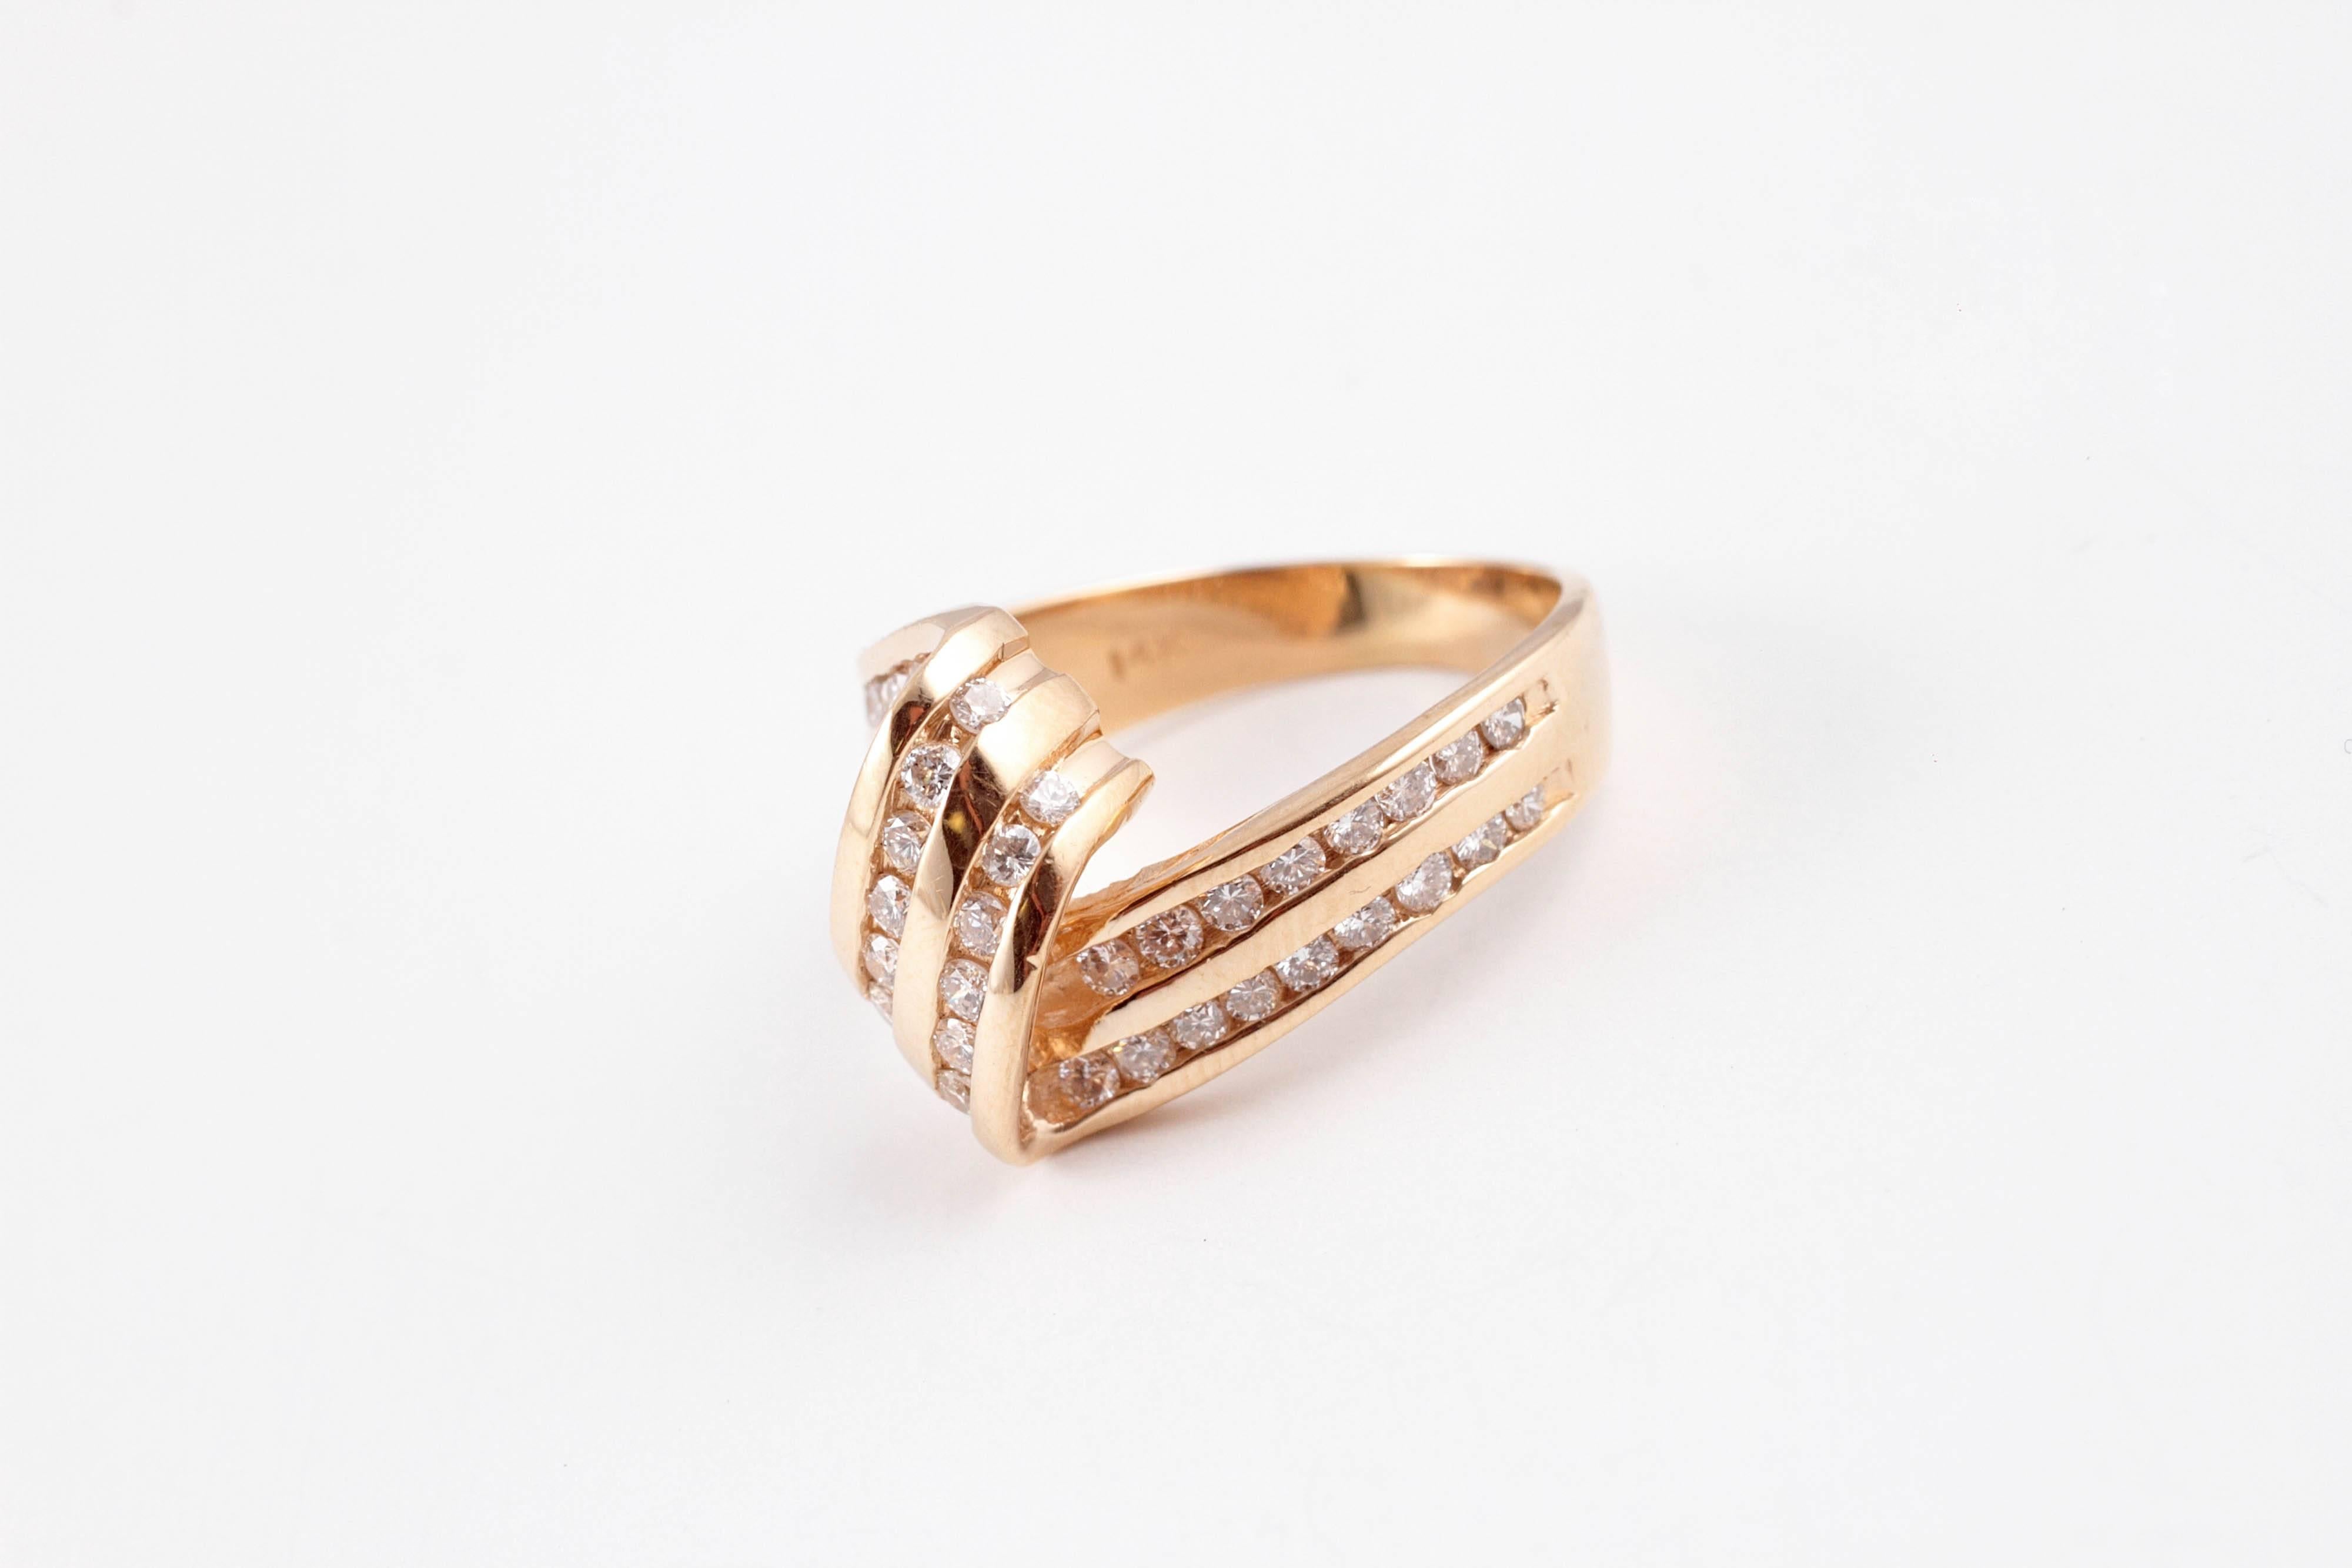 Fun and different - for any finger!  In 14 karat yellow gold, size 7 1/2. 